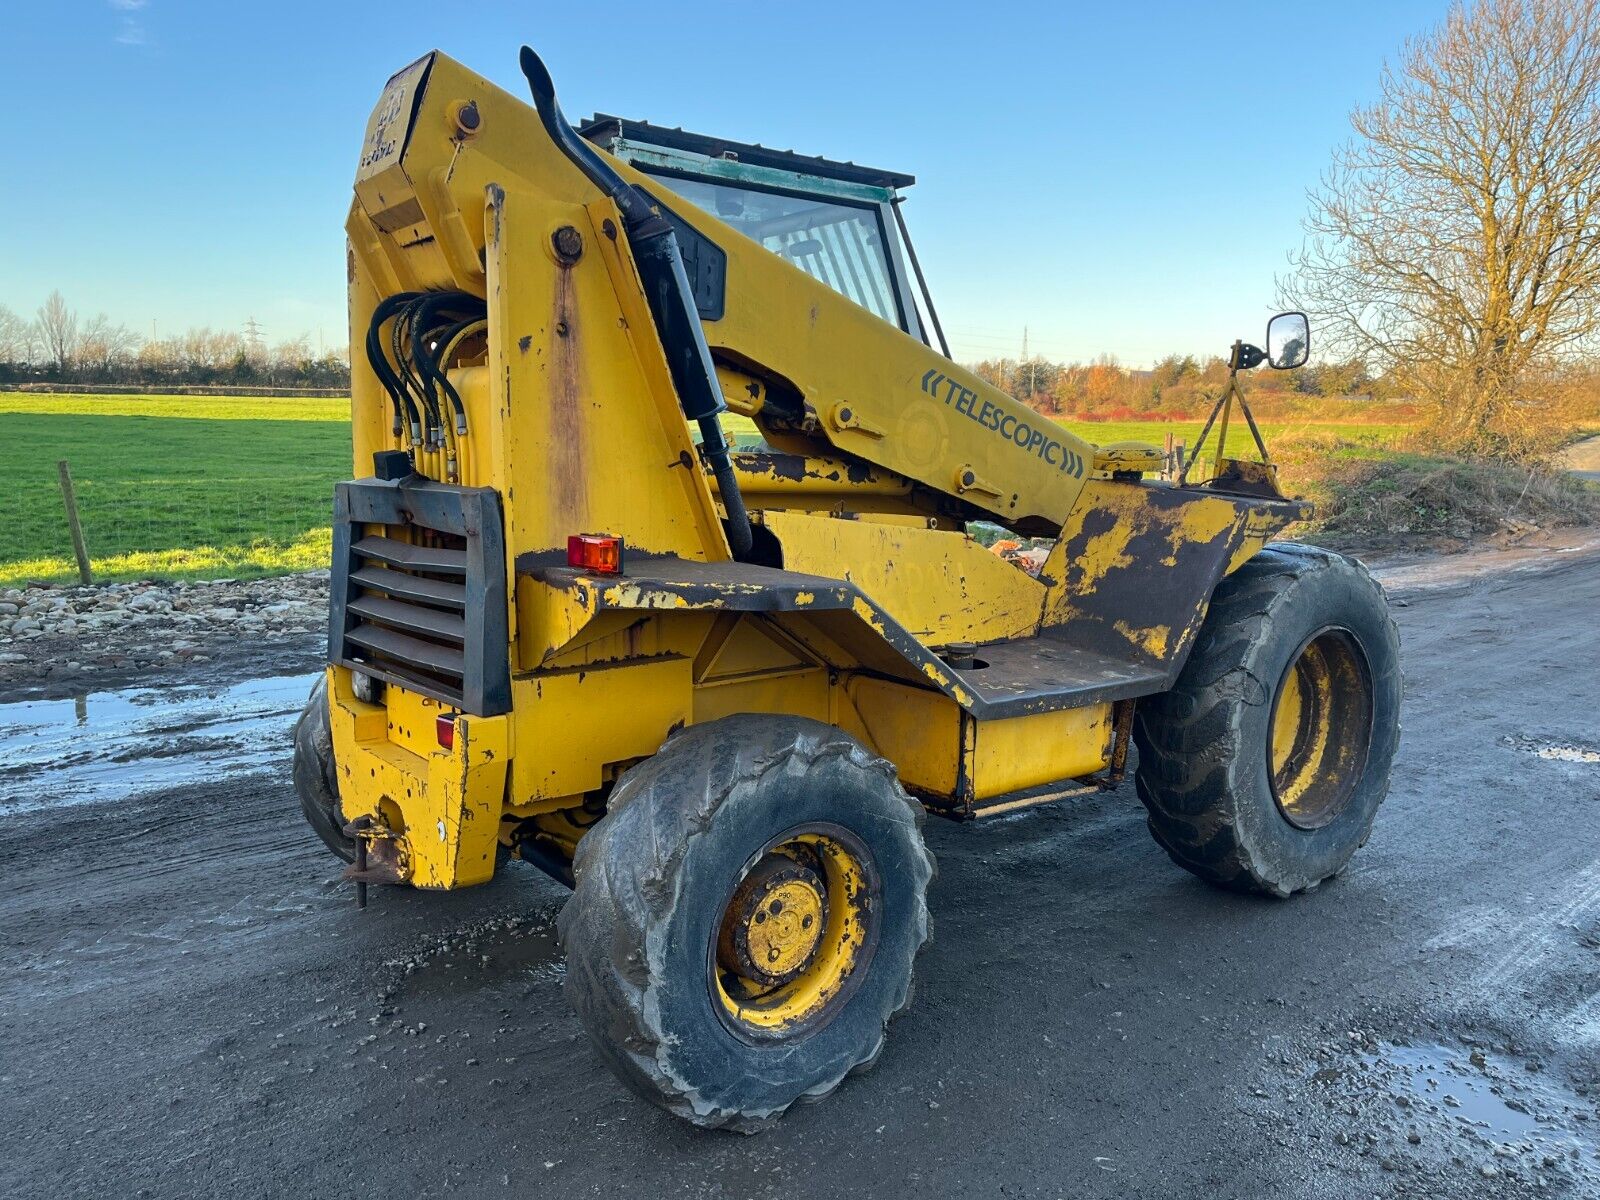 Bid on POWERFUL PRECISION: JCB 520-4 TELESCOPIC MUSCLE- Buy &amp; Sell on Auction with EAMA Group